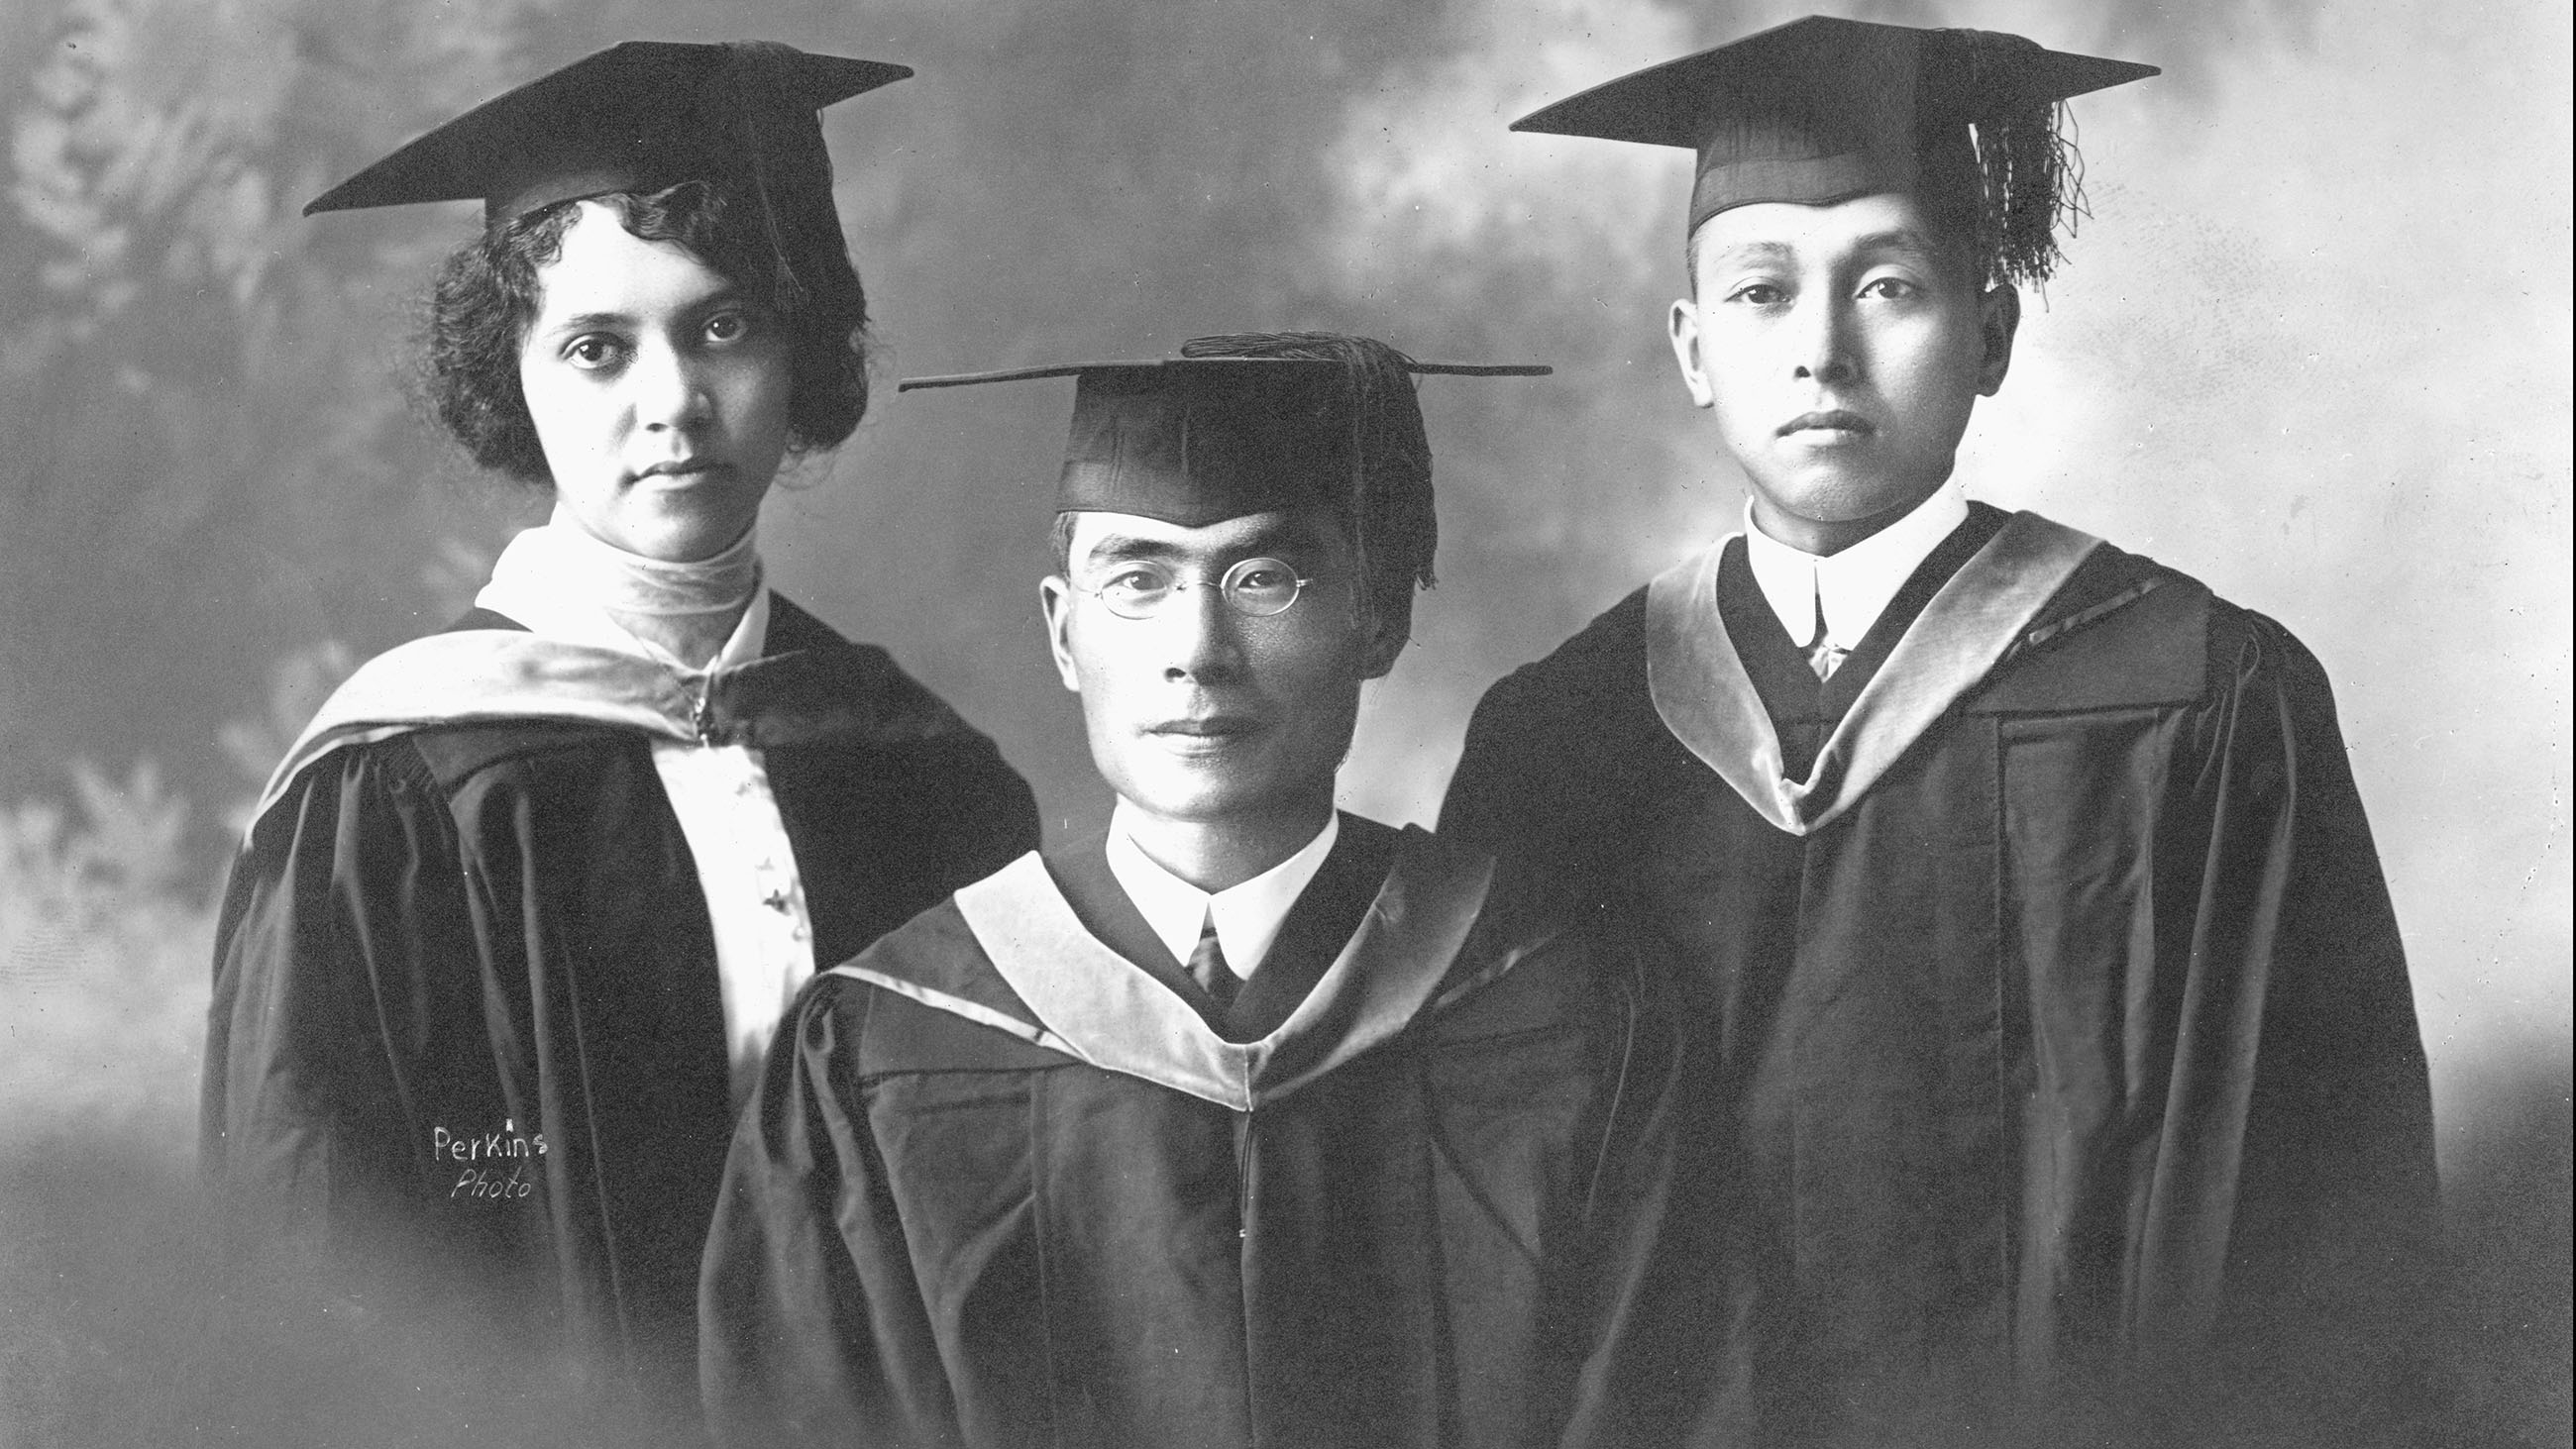 Alice Augusta Ball, left, alongside College of Hawaii classmates Yakichi Katsunari (center) and Tomoso Imai, earned a masters degree in chemistry in 1915. She went on to pioneer treatments for leprosy.